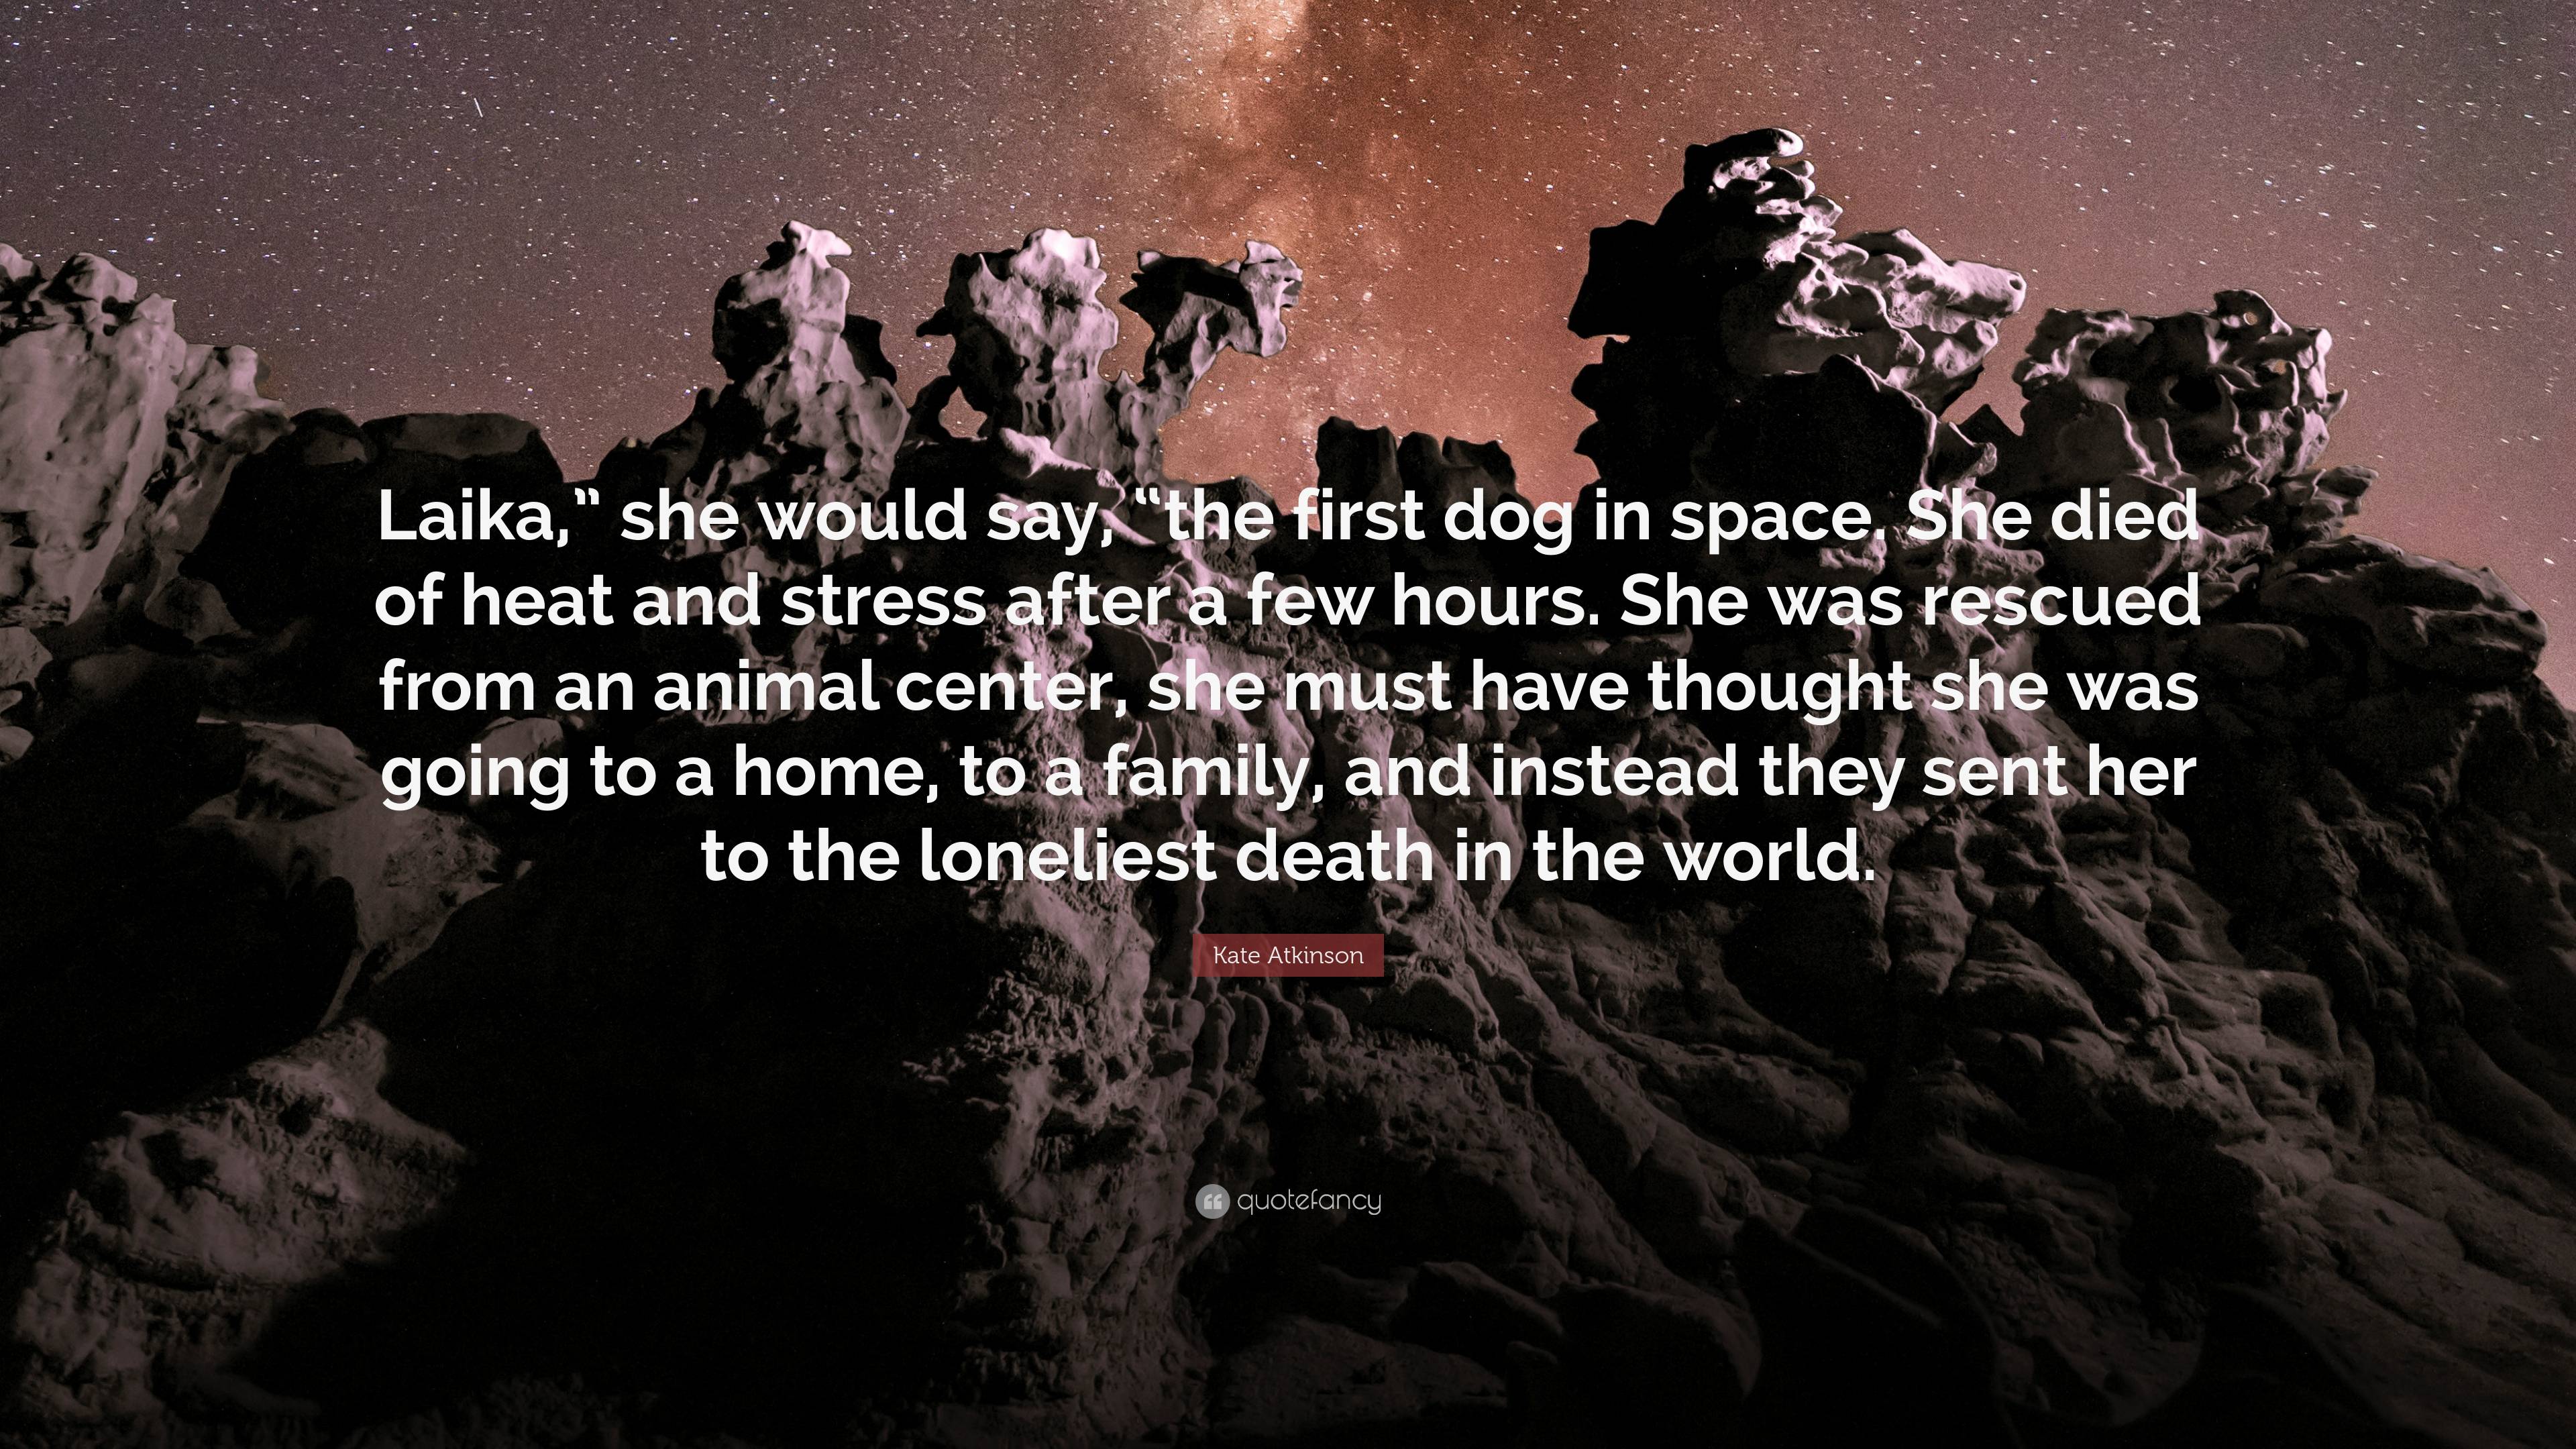 Kate Atkinson Quote: “Laika,” she would say, “the first dog in space. She  died of heat and stress after a few hours. She was rescued from an a...”